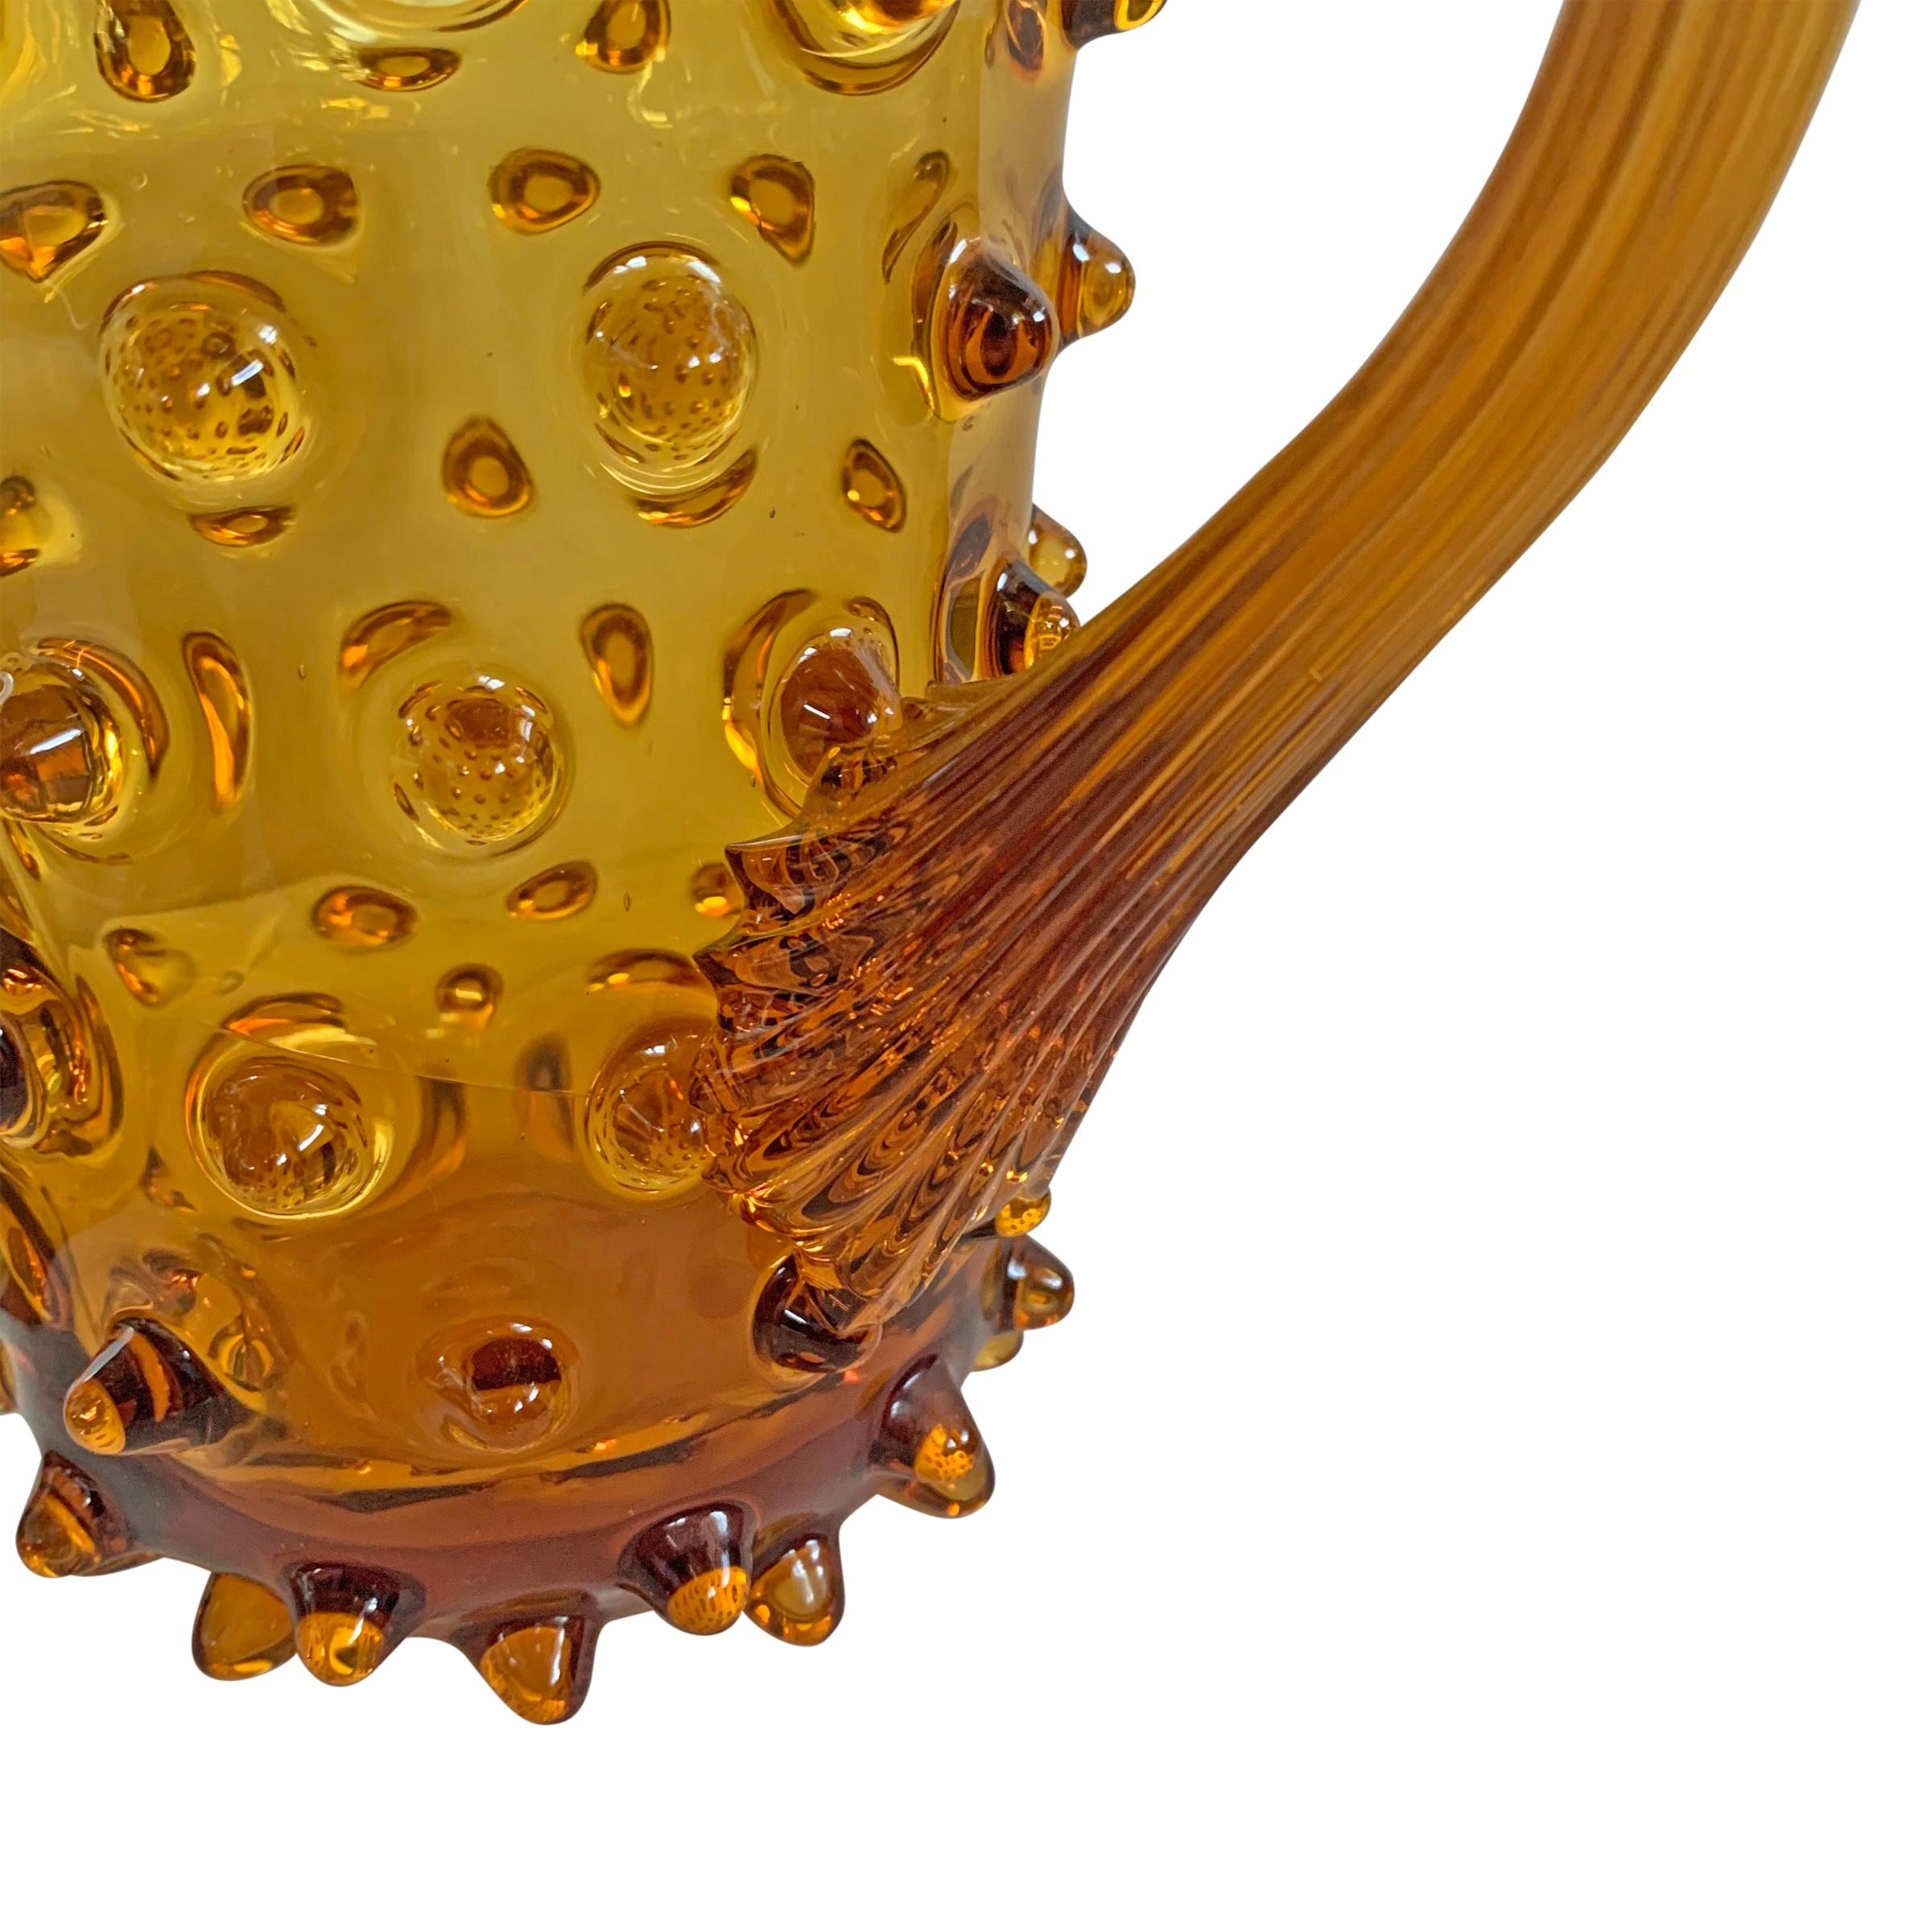 20th Century Midcentury American Amber Hobnail Glass Pitcher